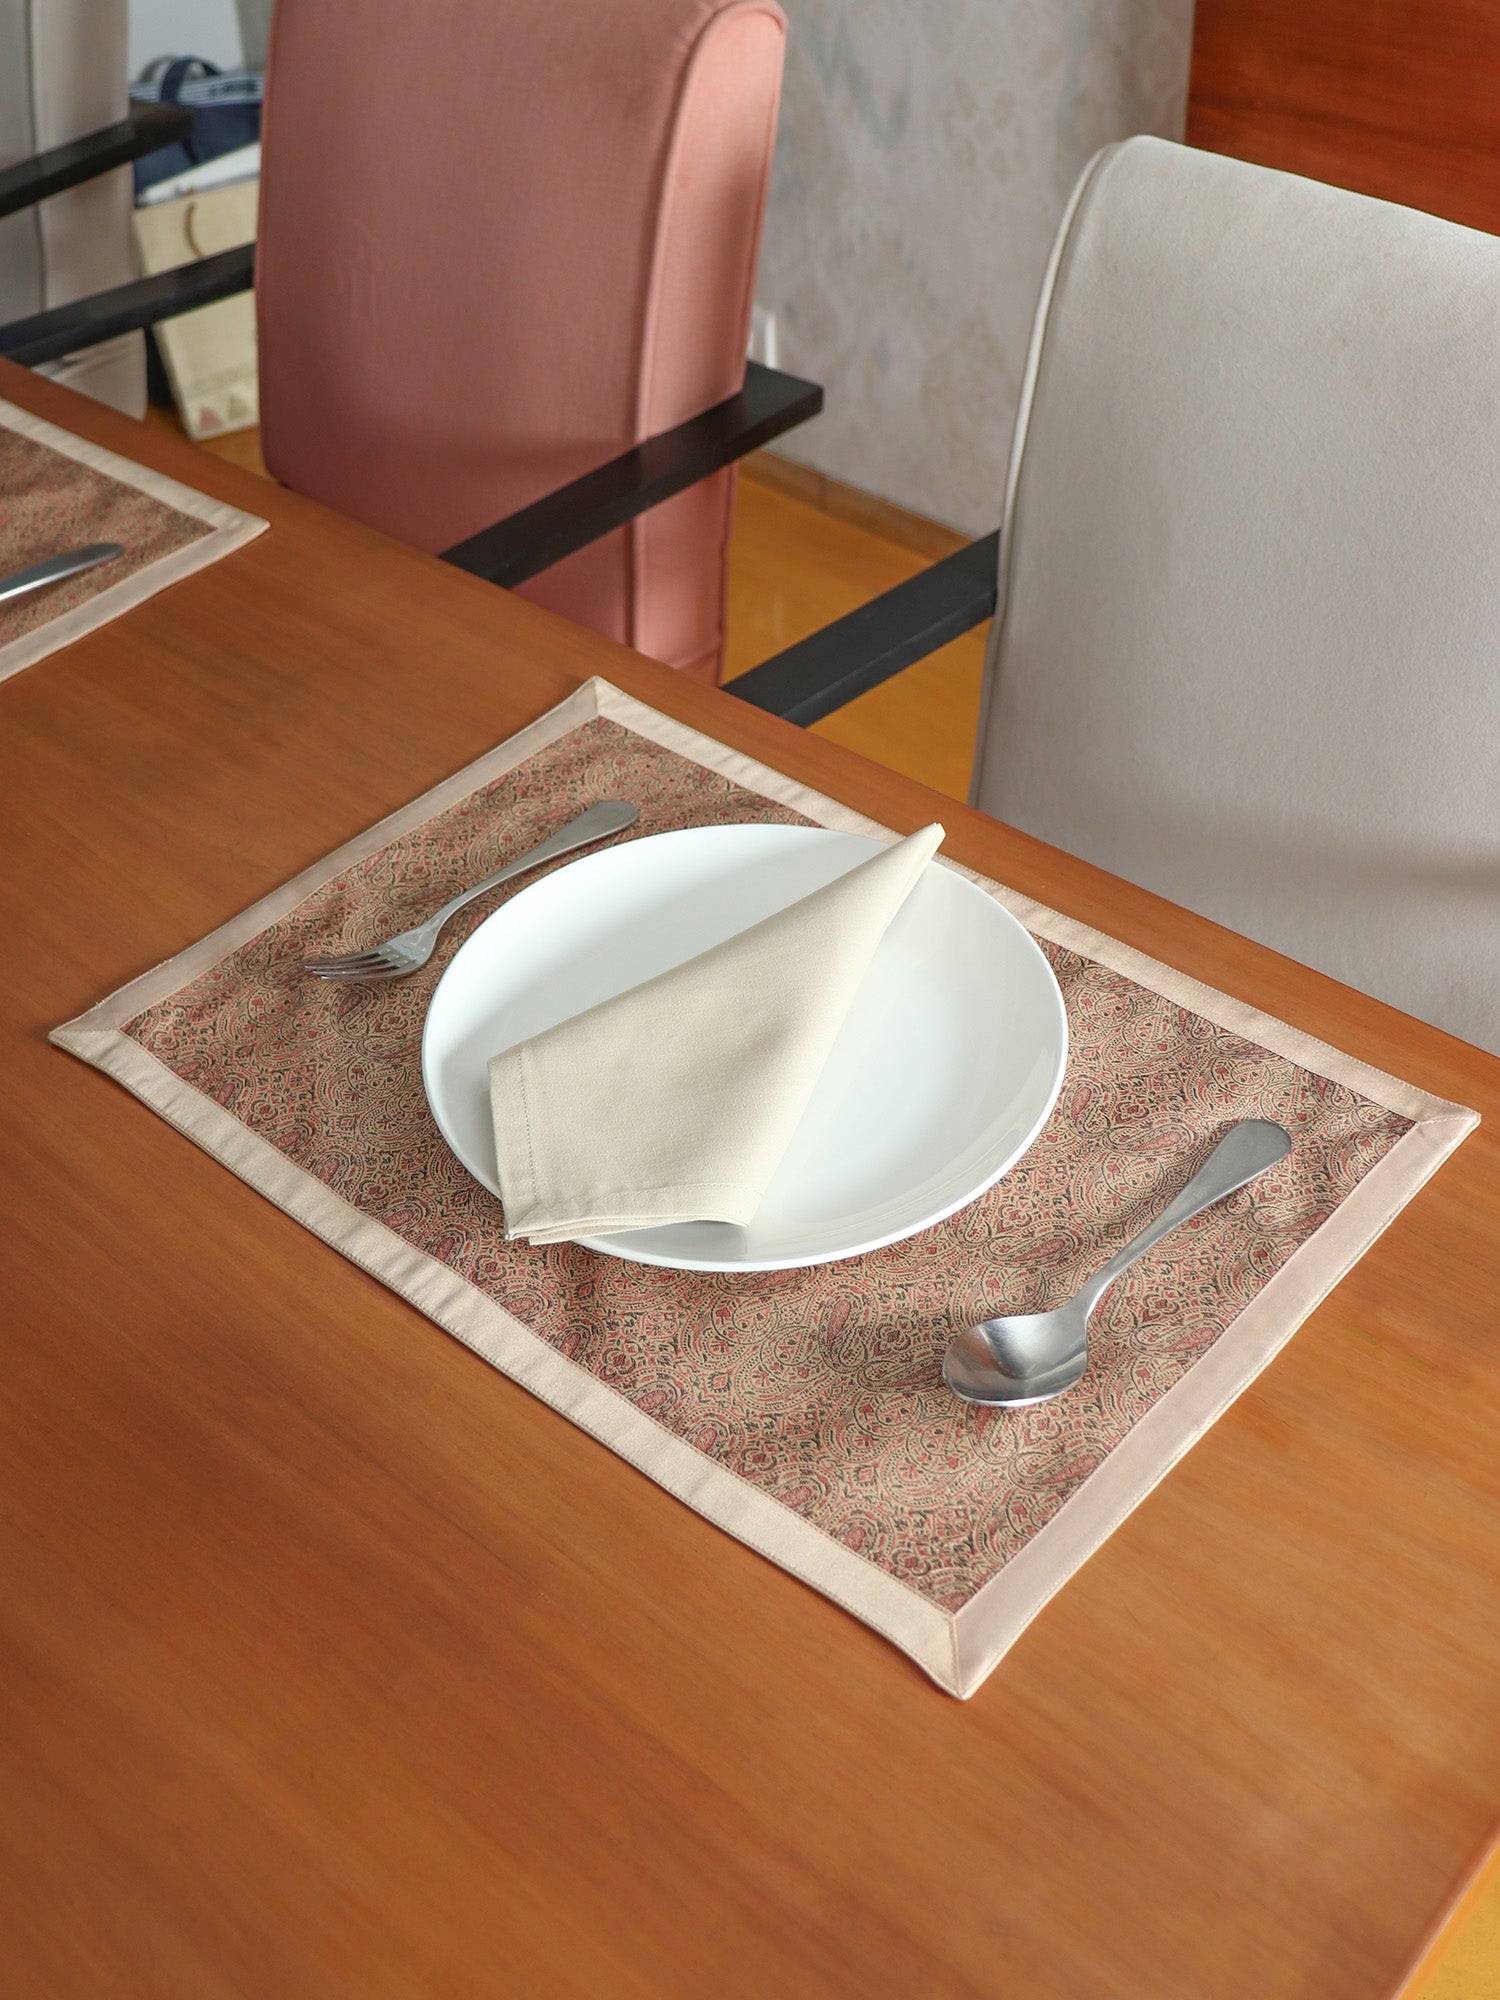 Brocade Silk Tablemats and Napkins Set | Golden Beige | Set of 6 Mats 13x19 in & Set of 6 Dining Napkins 16x16in